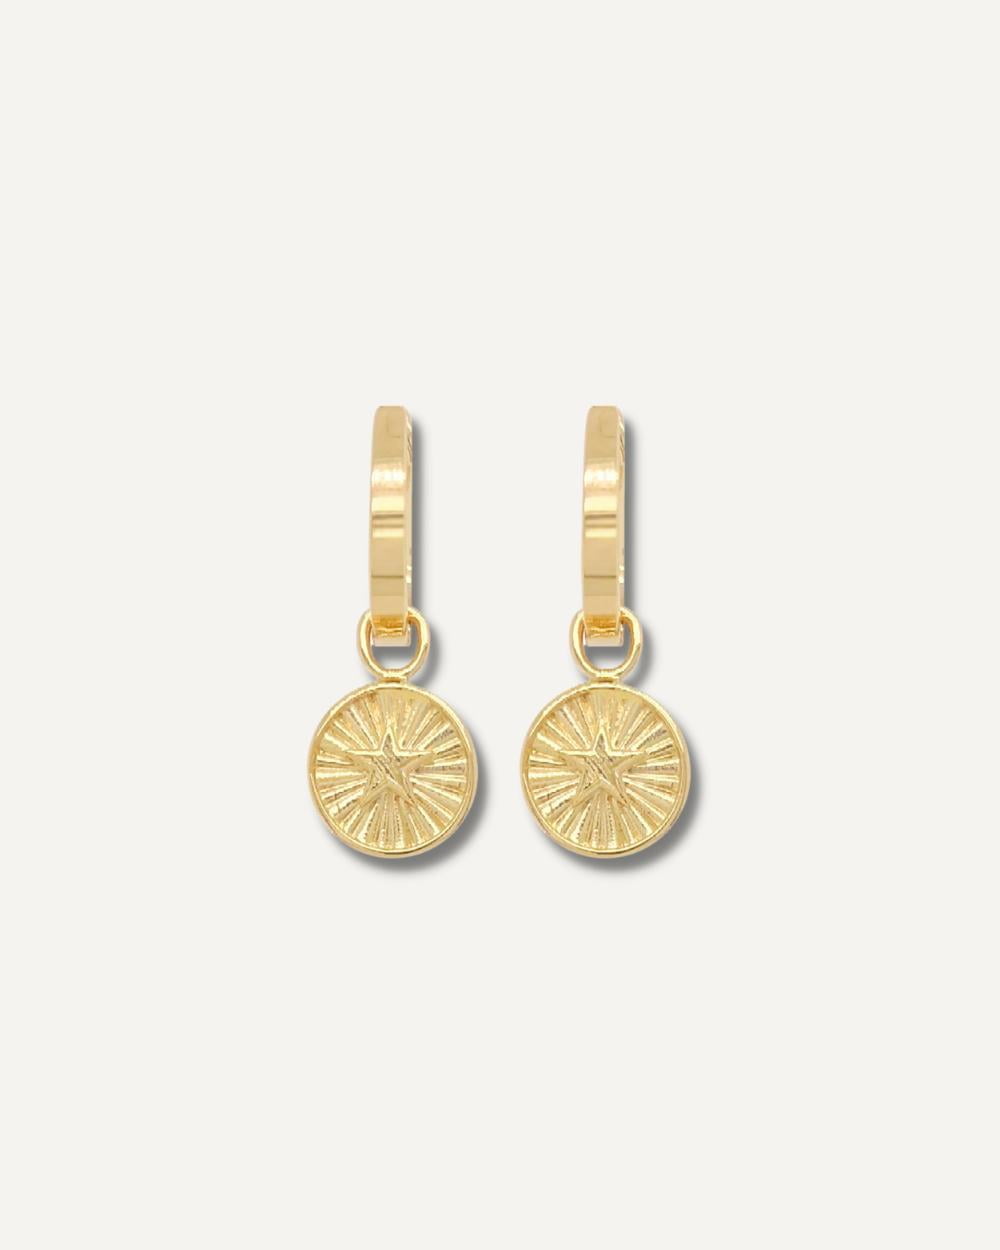 Charm earrings with star motif.